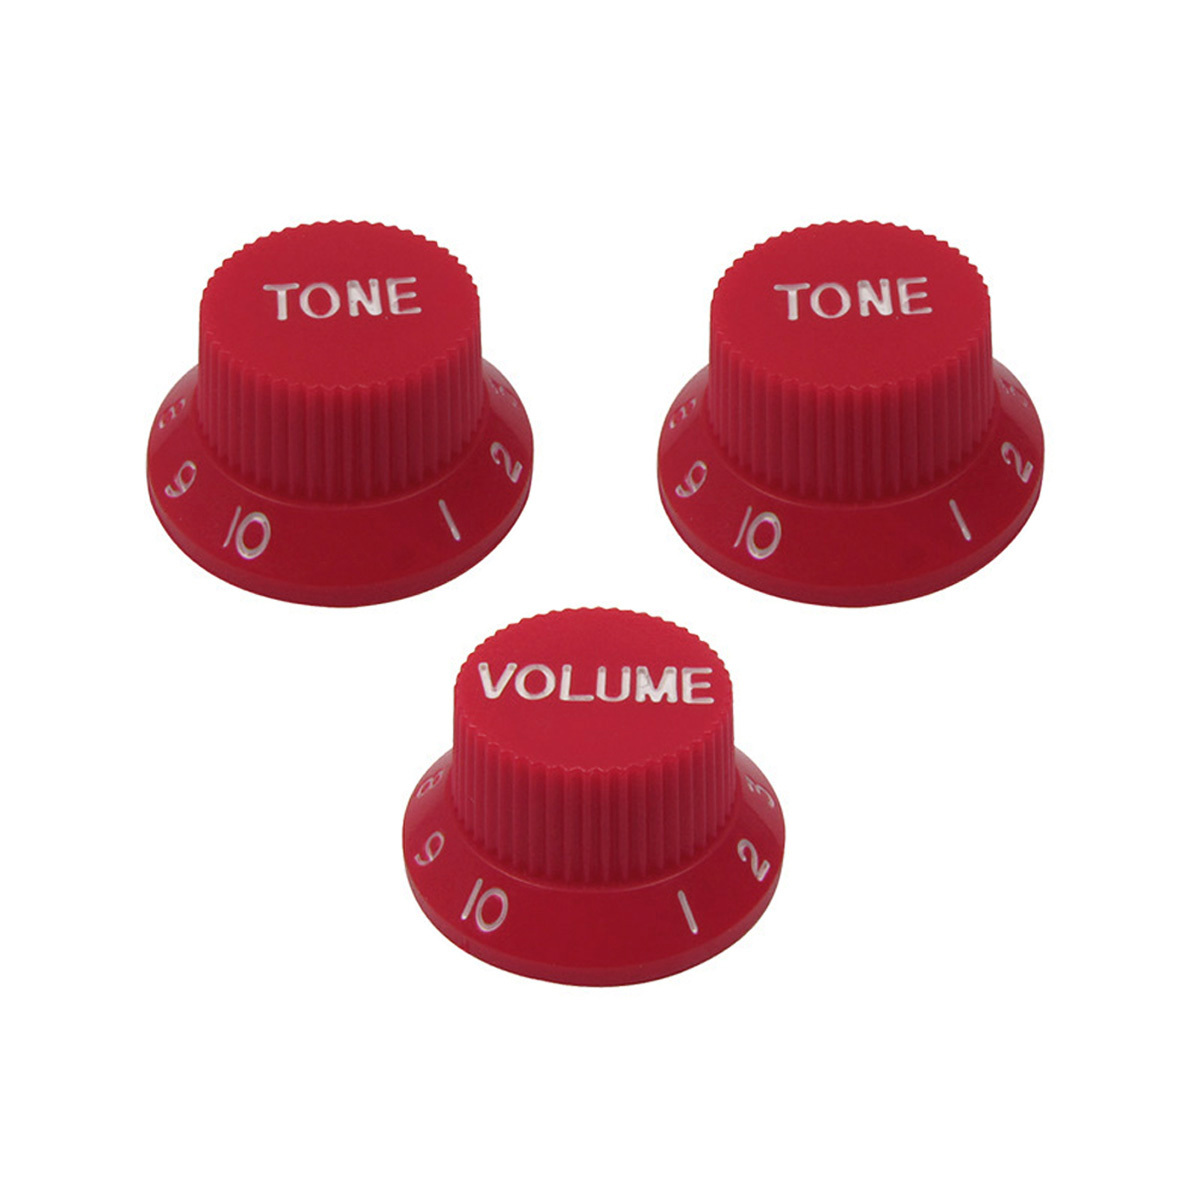 4 Pcs Red Speed Control Knobs for Electric Guitar Parts Replacement